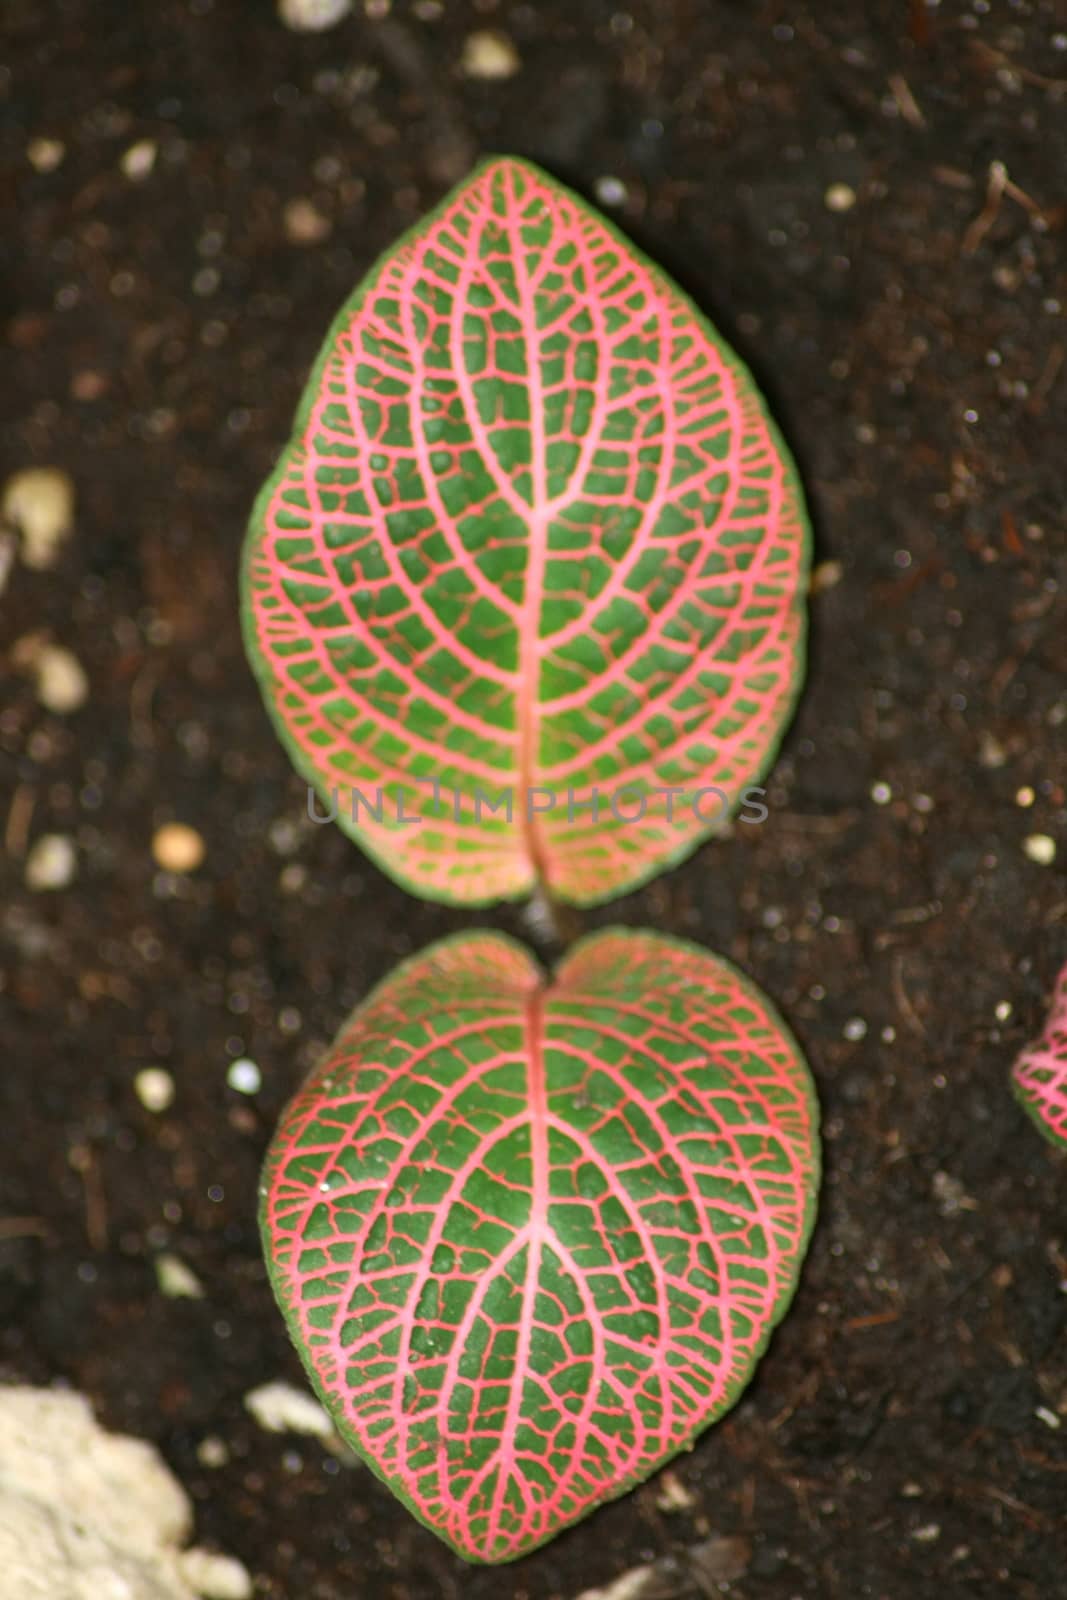 Two green plant leaves with red veins